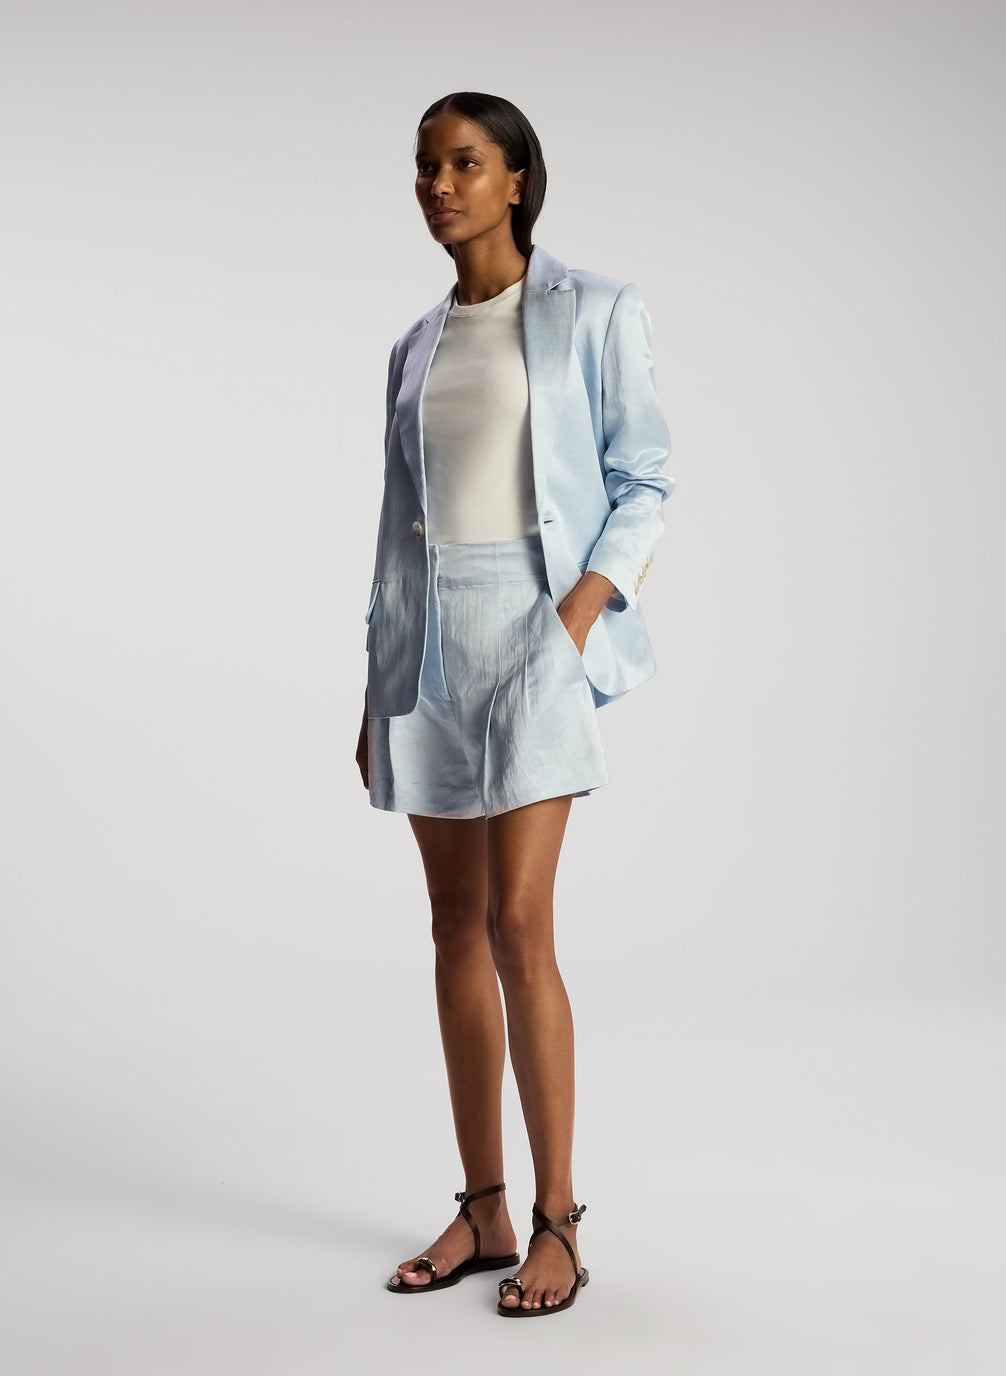 side view of woman wearing light blue blazer and matching shorts